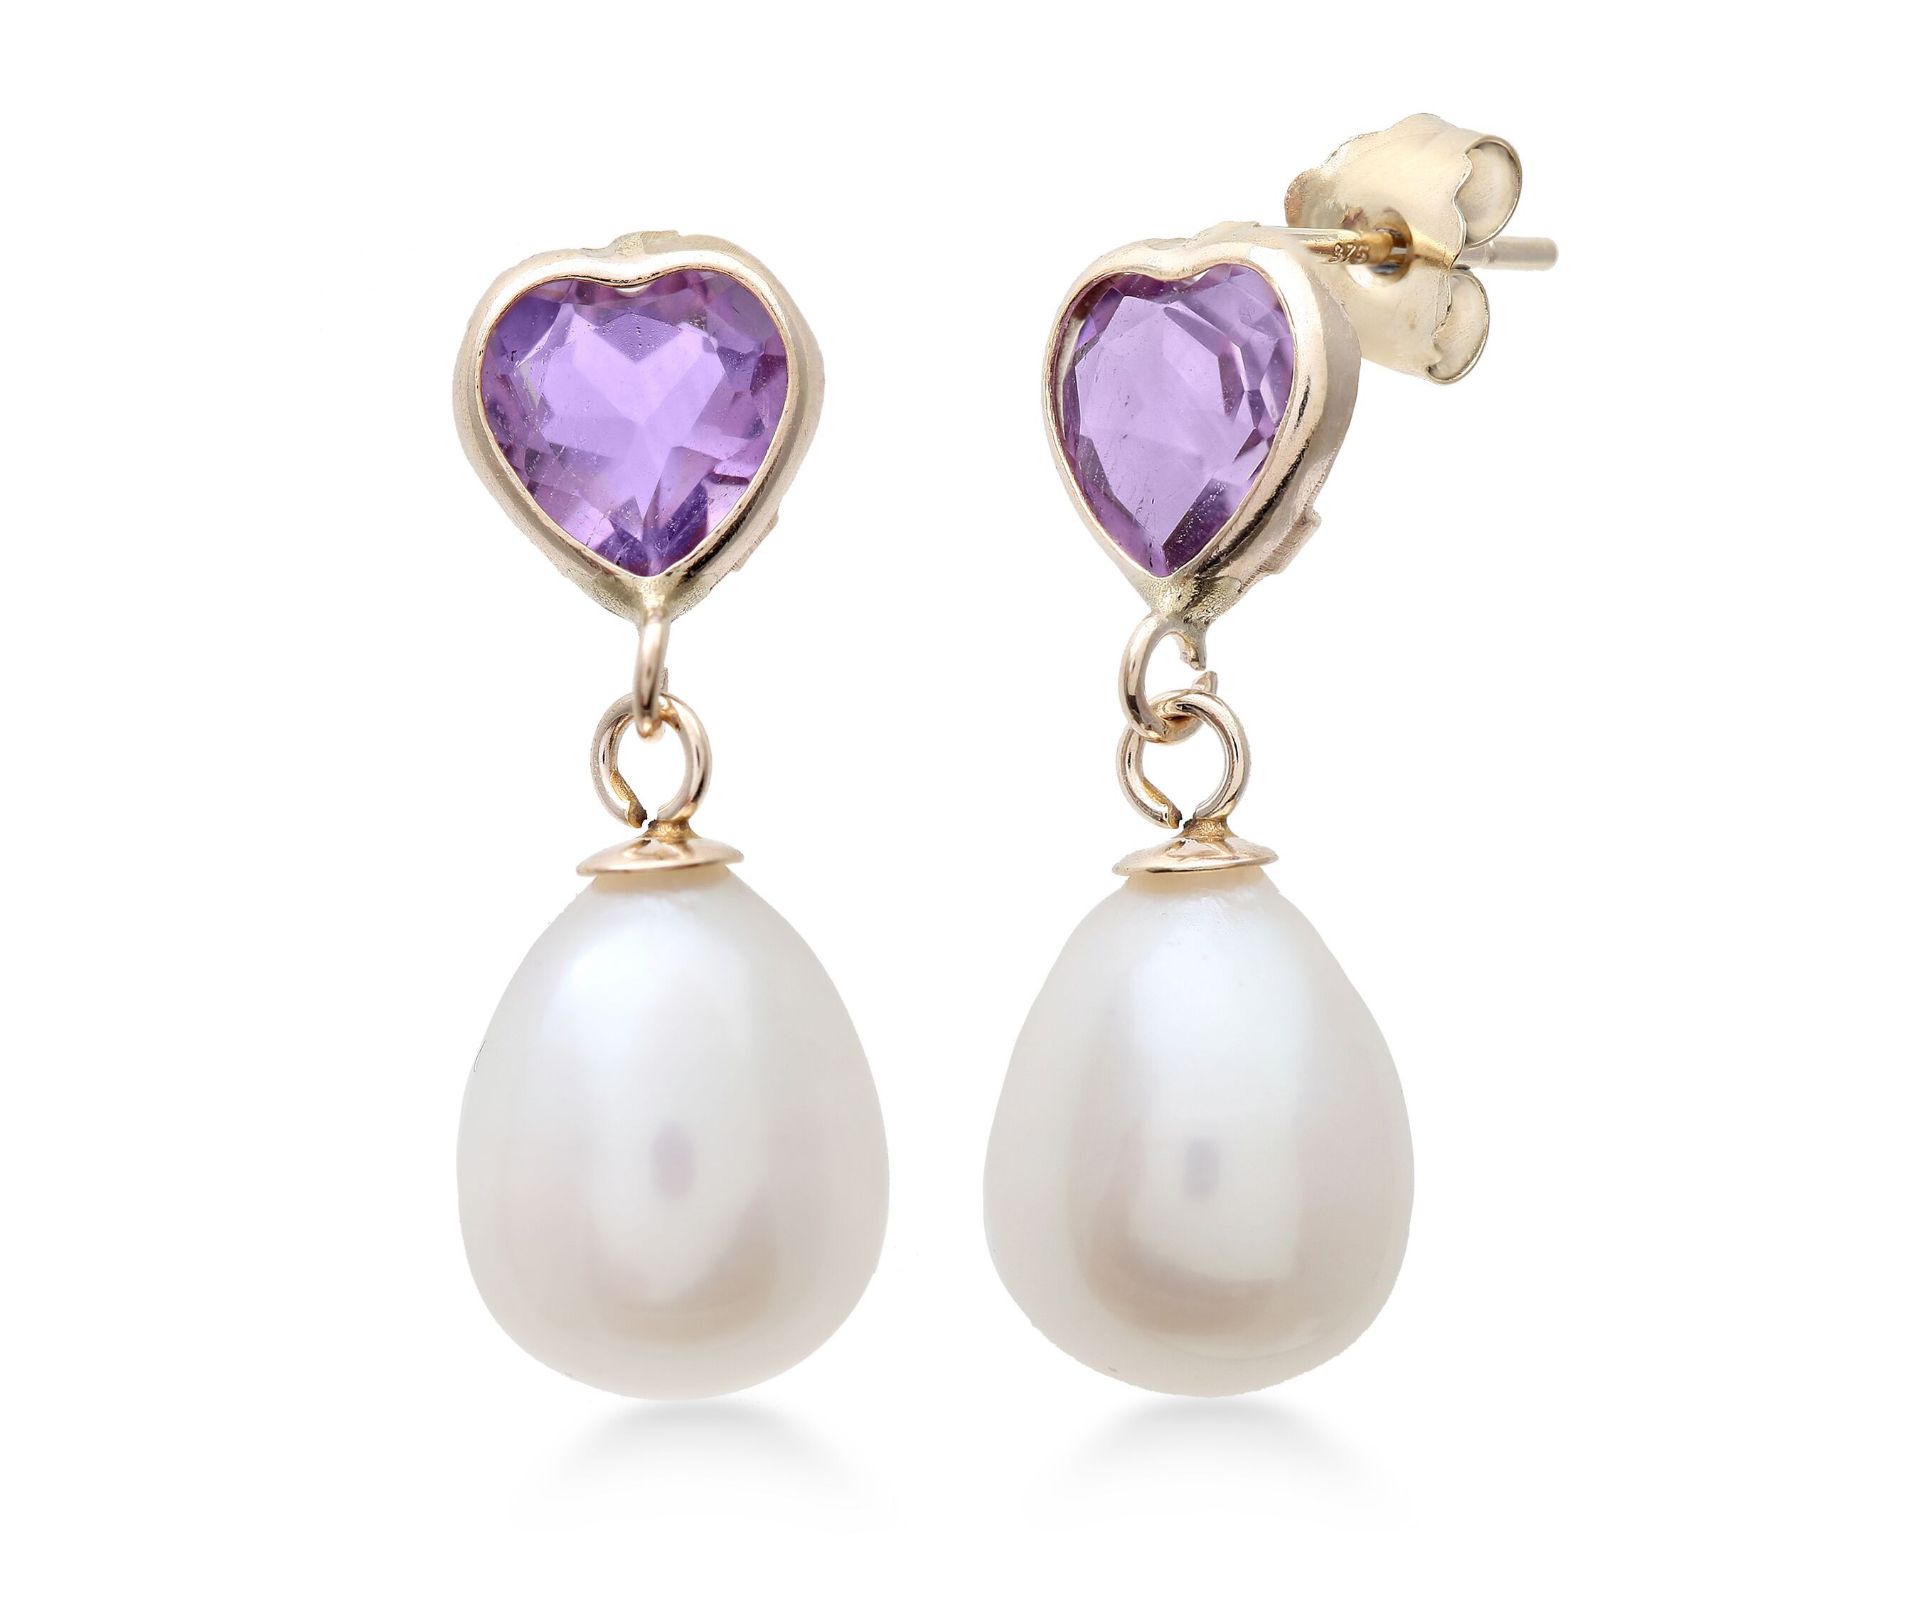 Heart Cut Amethyst And Pearl Earrings, Metal 9ct Yellow Gold, Weight (g) 0.8, RRP £119.99 (E34110-